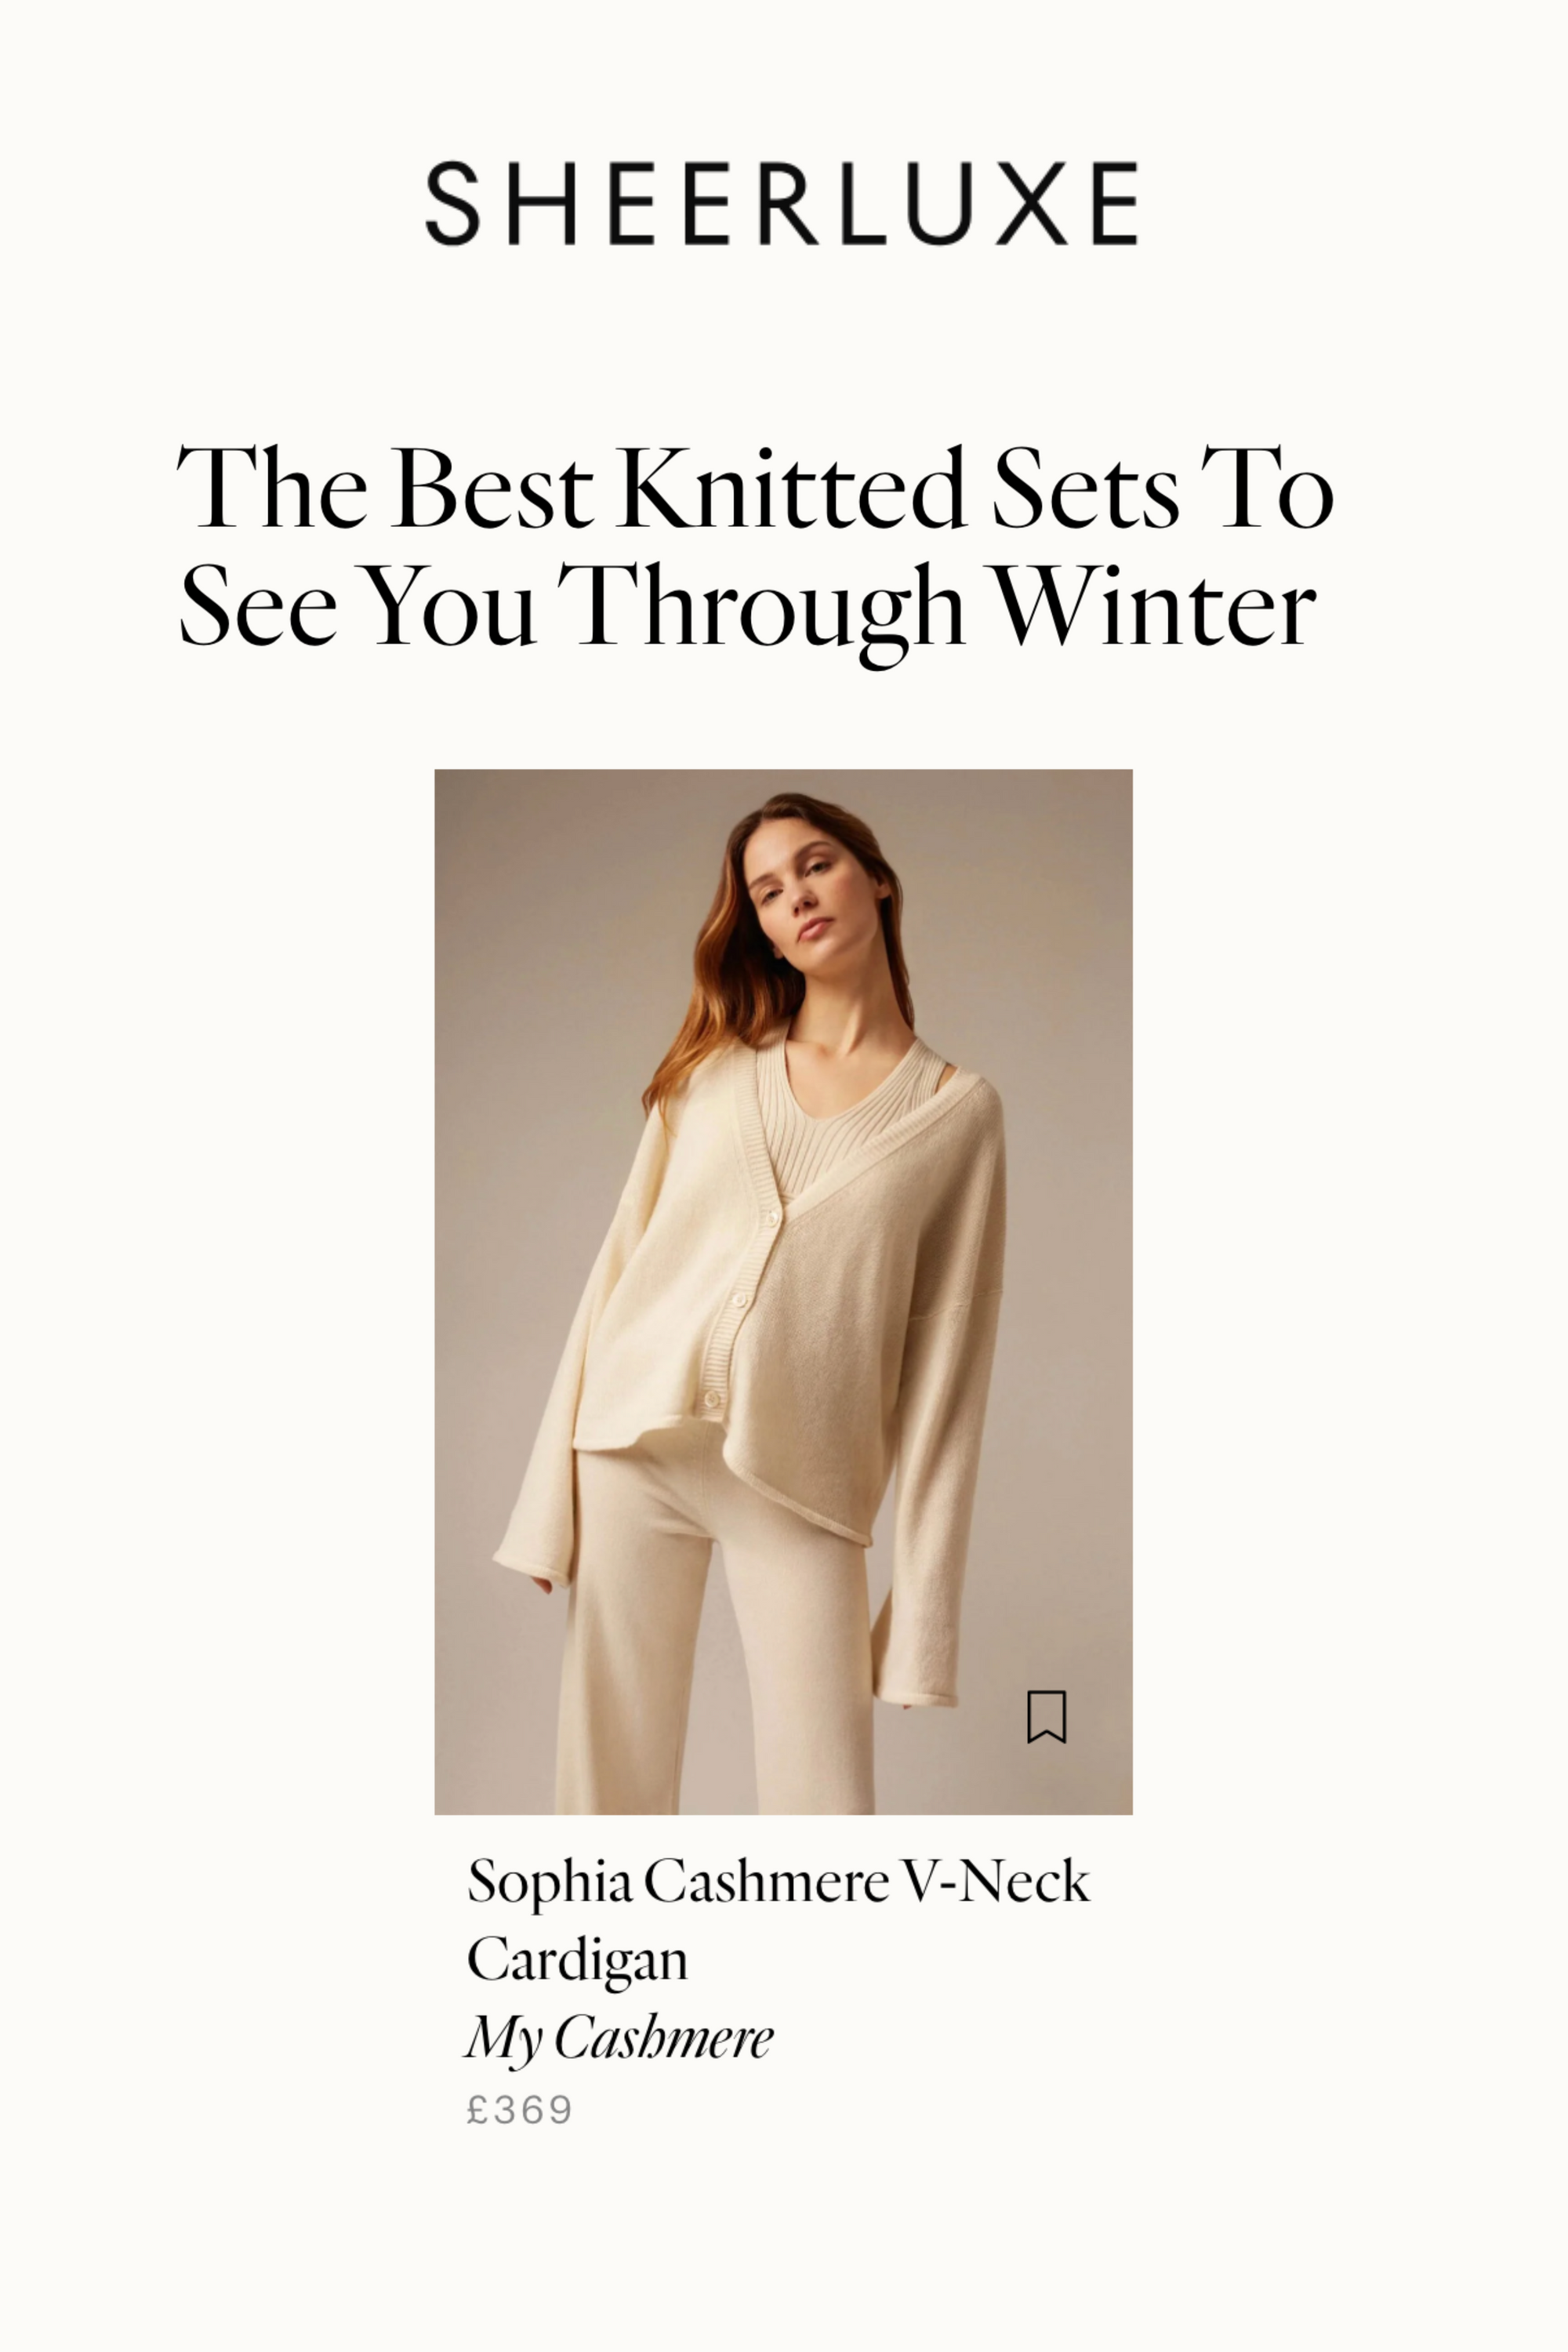 SHEERLUXE | THE BEST KNITTED SETS TO SEE YOU THROUGH WINTER